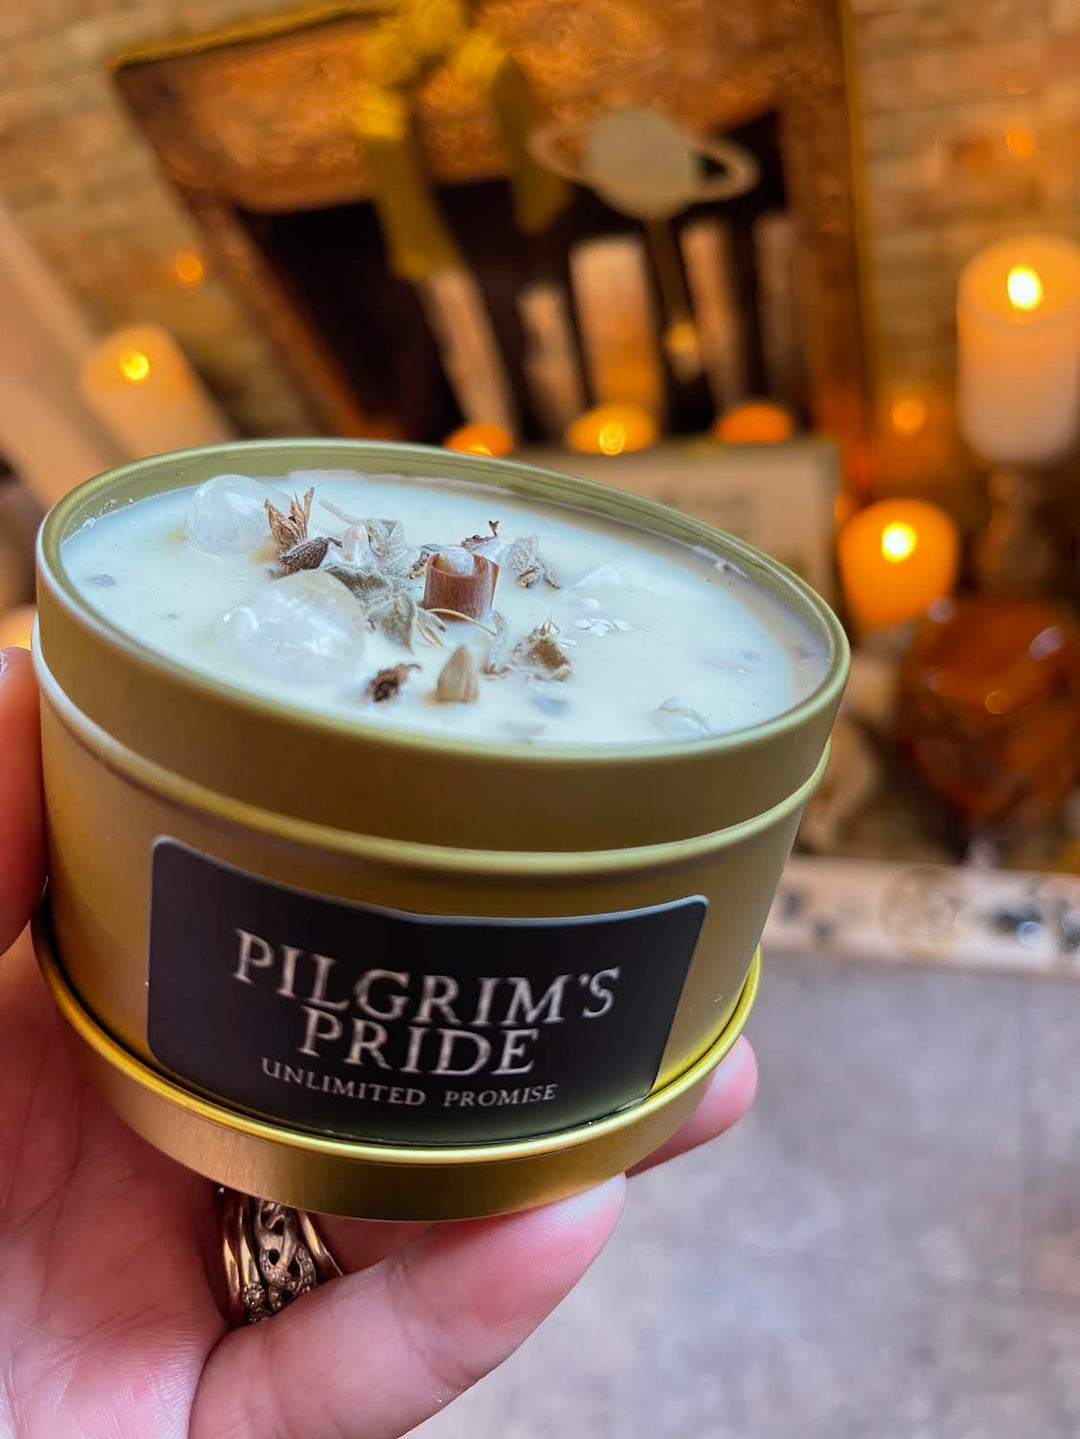 this is the front of the Pilgrim's Pride candle